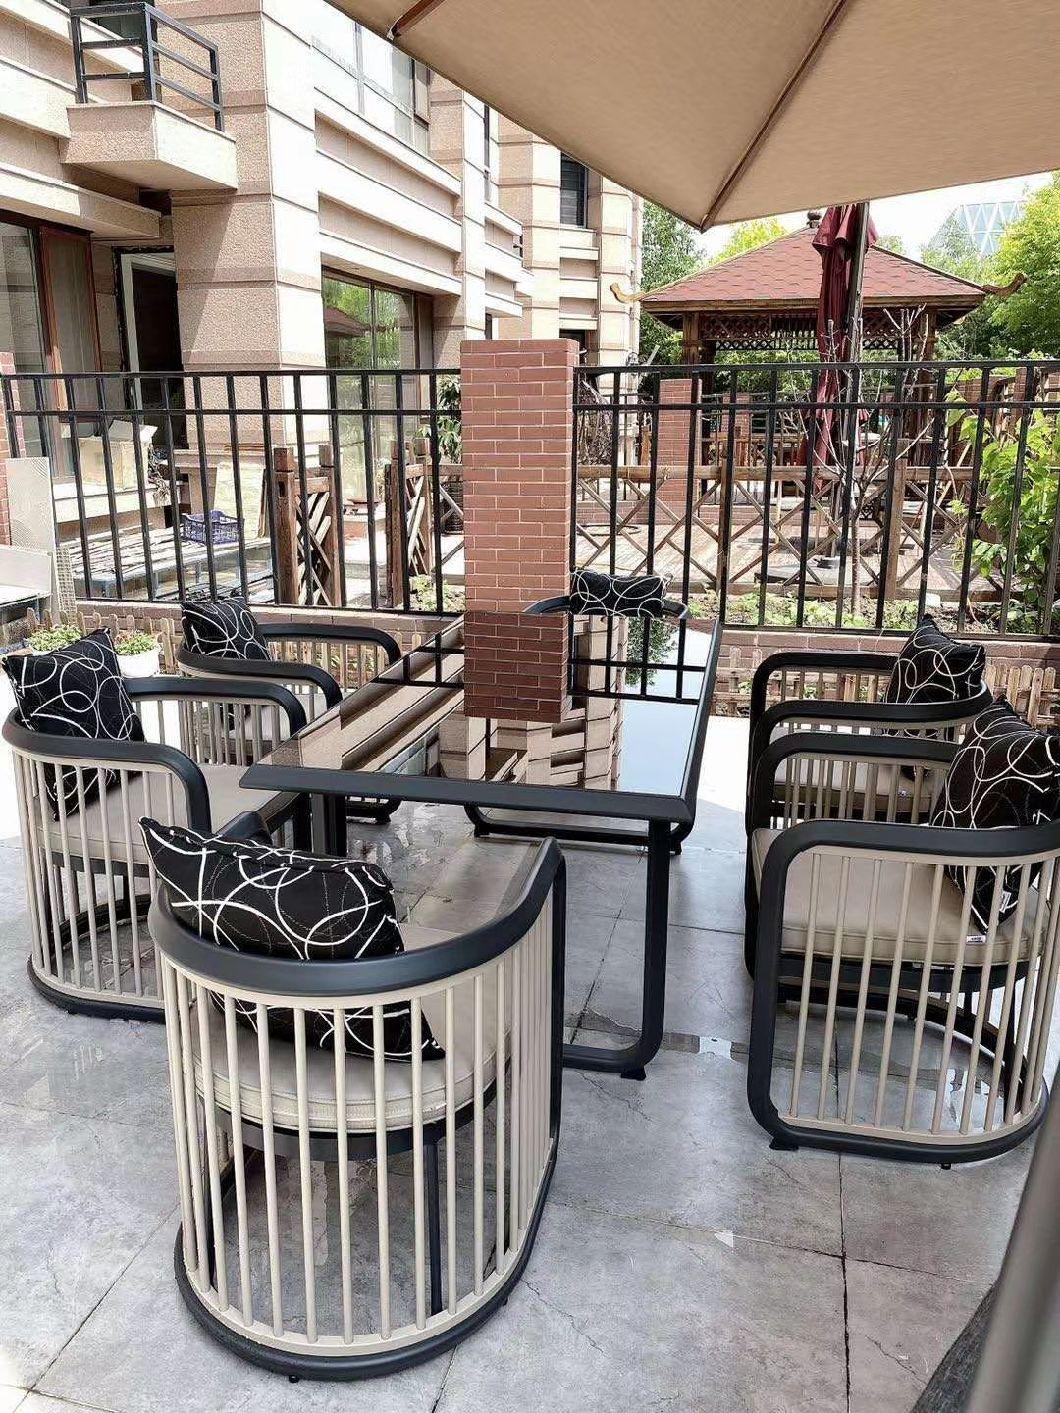 Modern Whole Aluminum Dining Chair and Table Outdoor Garden Furniture